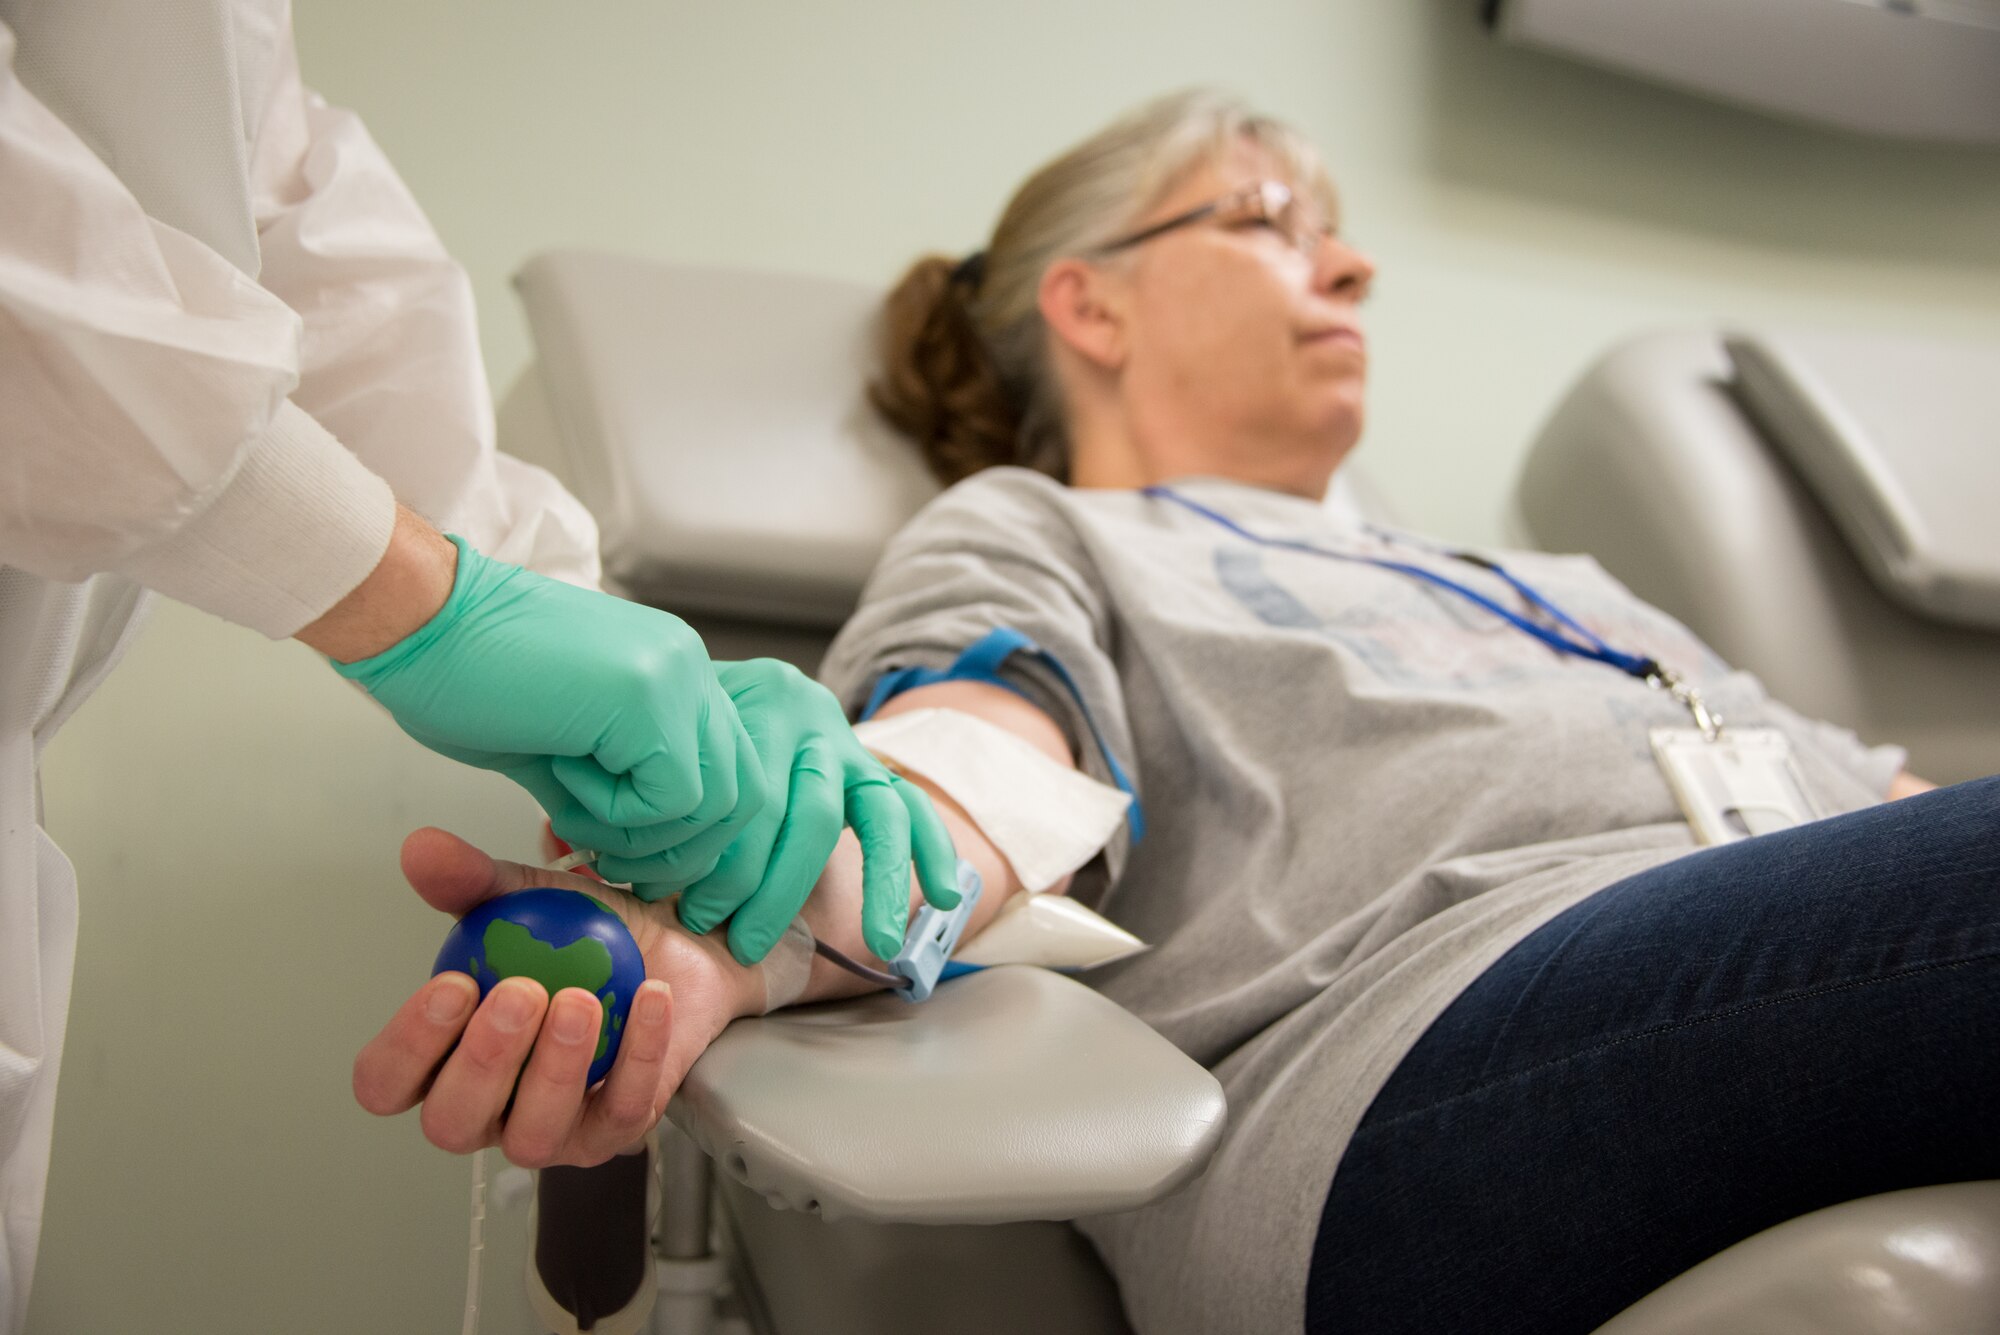 Airman 1st Class Shawn Audrey, 81st Diagnostics and Therapeutics Squadron lab technician, draws the blood of Susan Gardner, 334th Training Squadron commander support staff, March 6, 2015, at the Keesler Blood Donor Center, Keesler Air Force Base, Miss. Gardner strives to donate her blood every 56 days. The center is located at the 81st Medical Group's Arnold Medical Annex.  (U.S. Air Force photo by Marie Floyd)